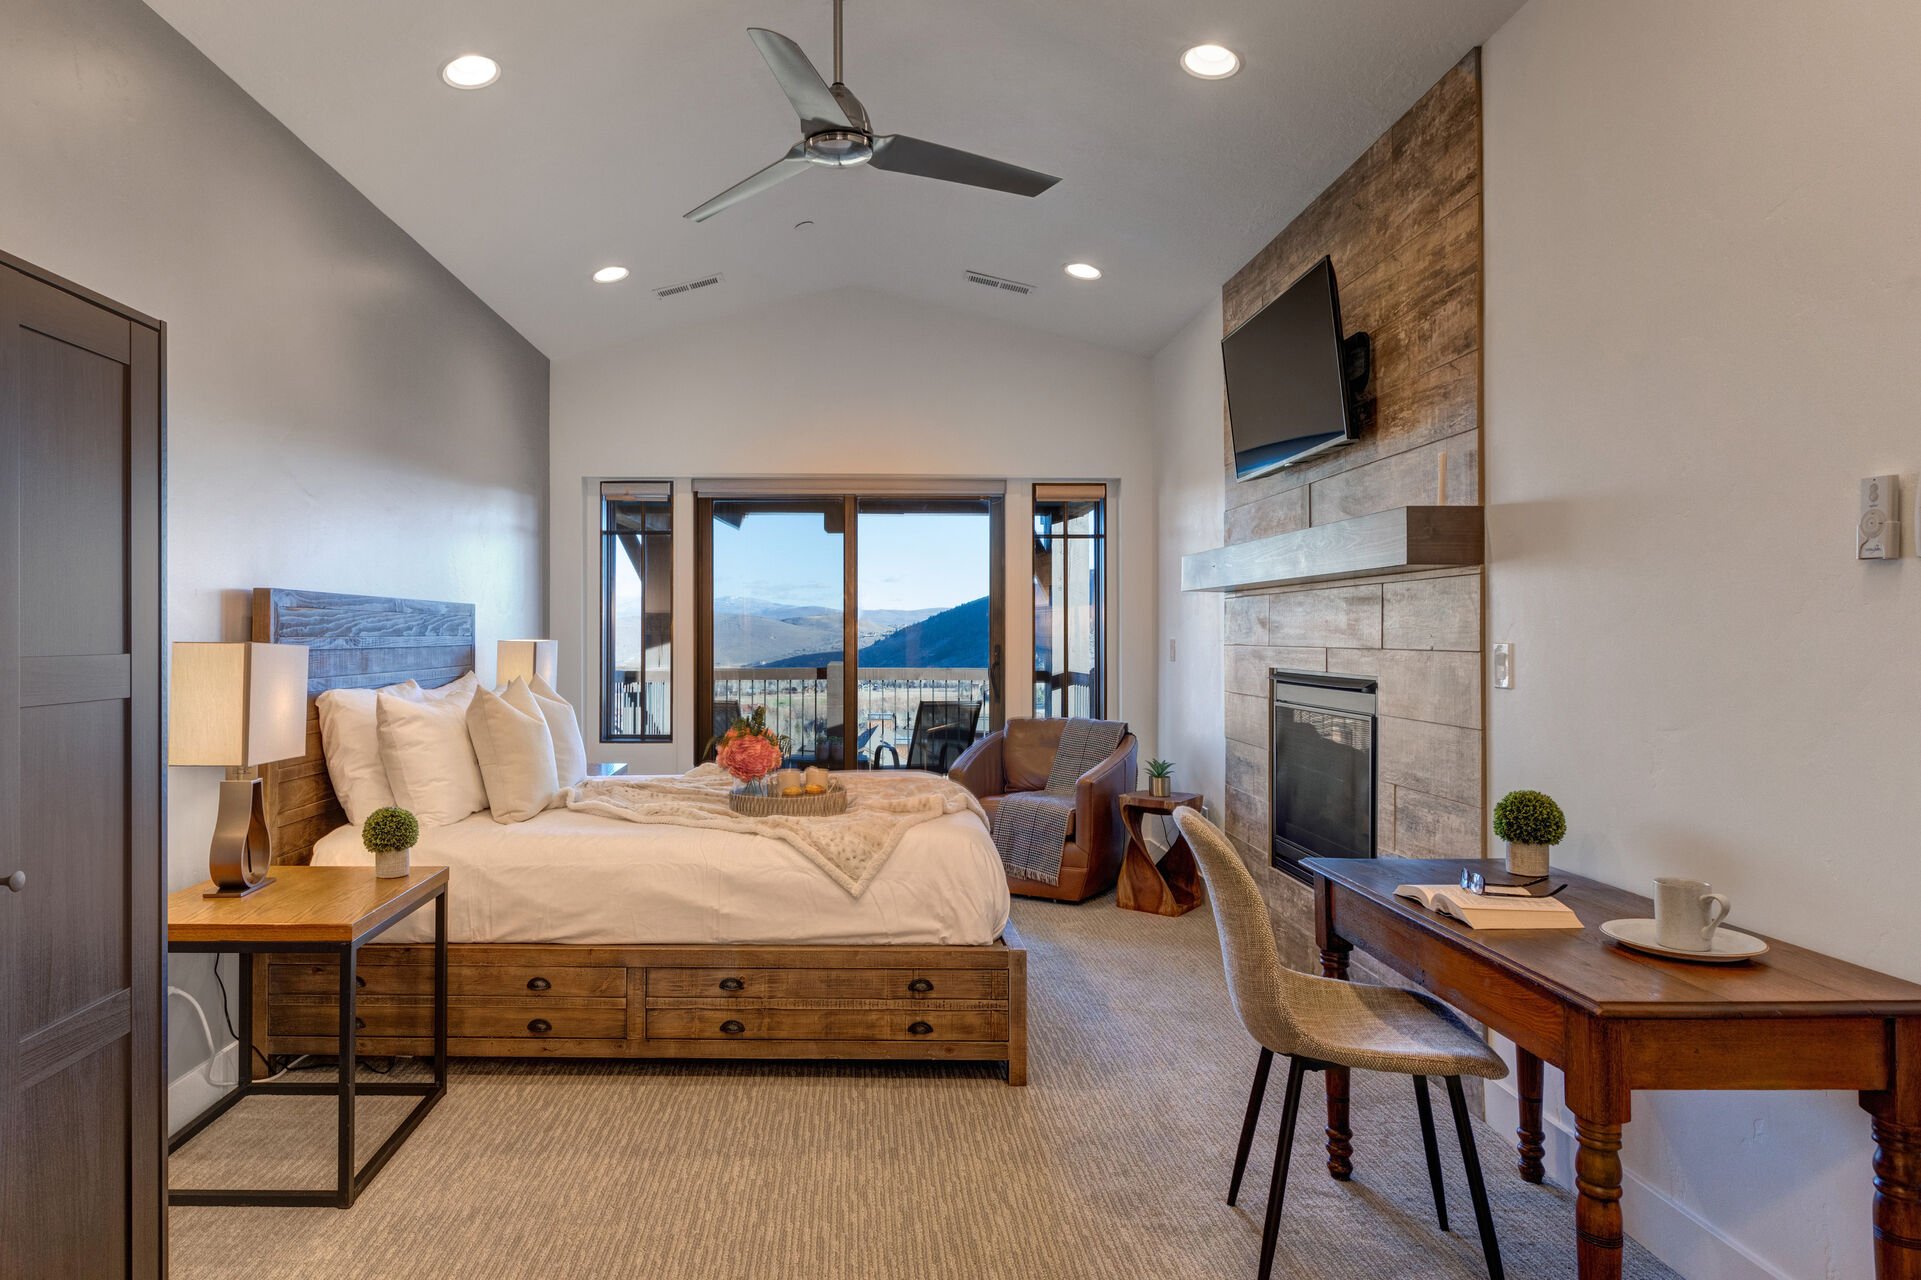 Upper Level Master Bedroom with a Private Deck